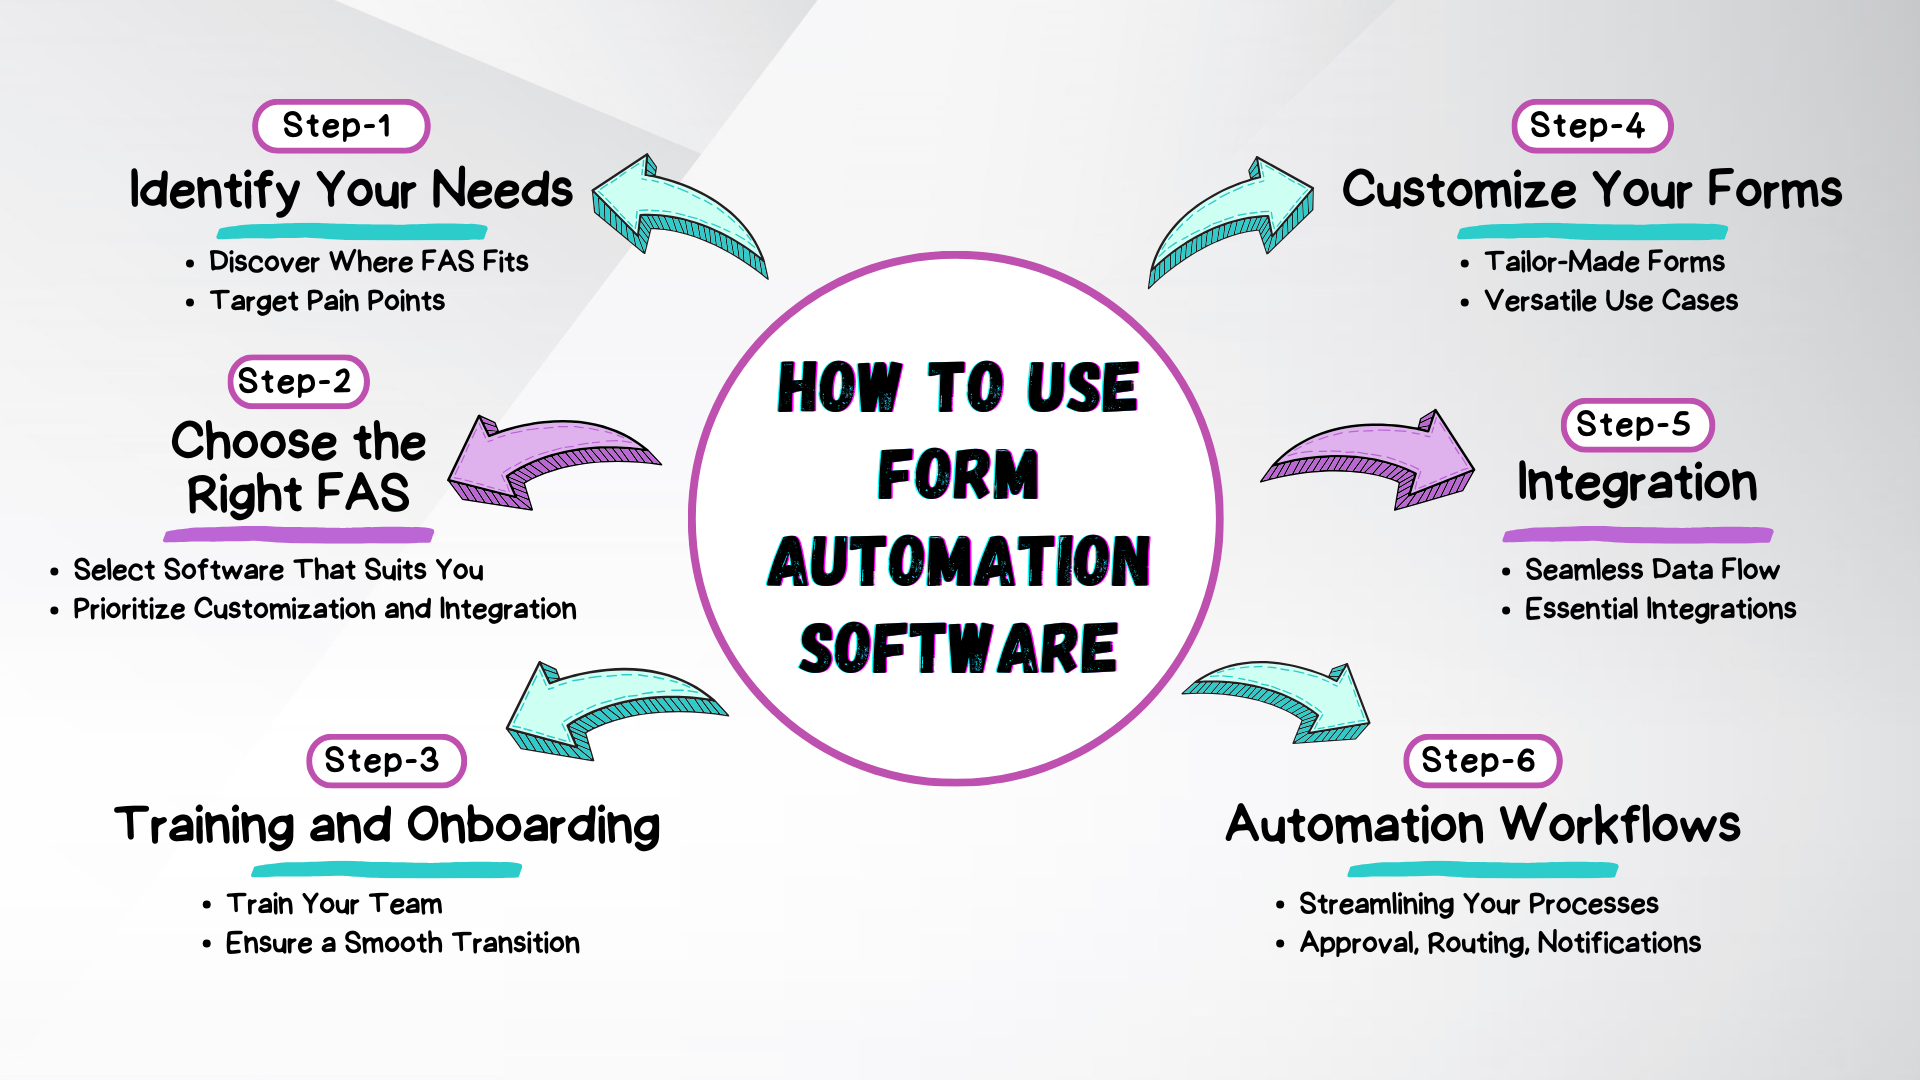 Form Automation Software